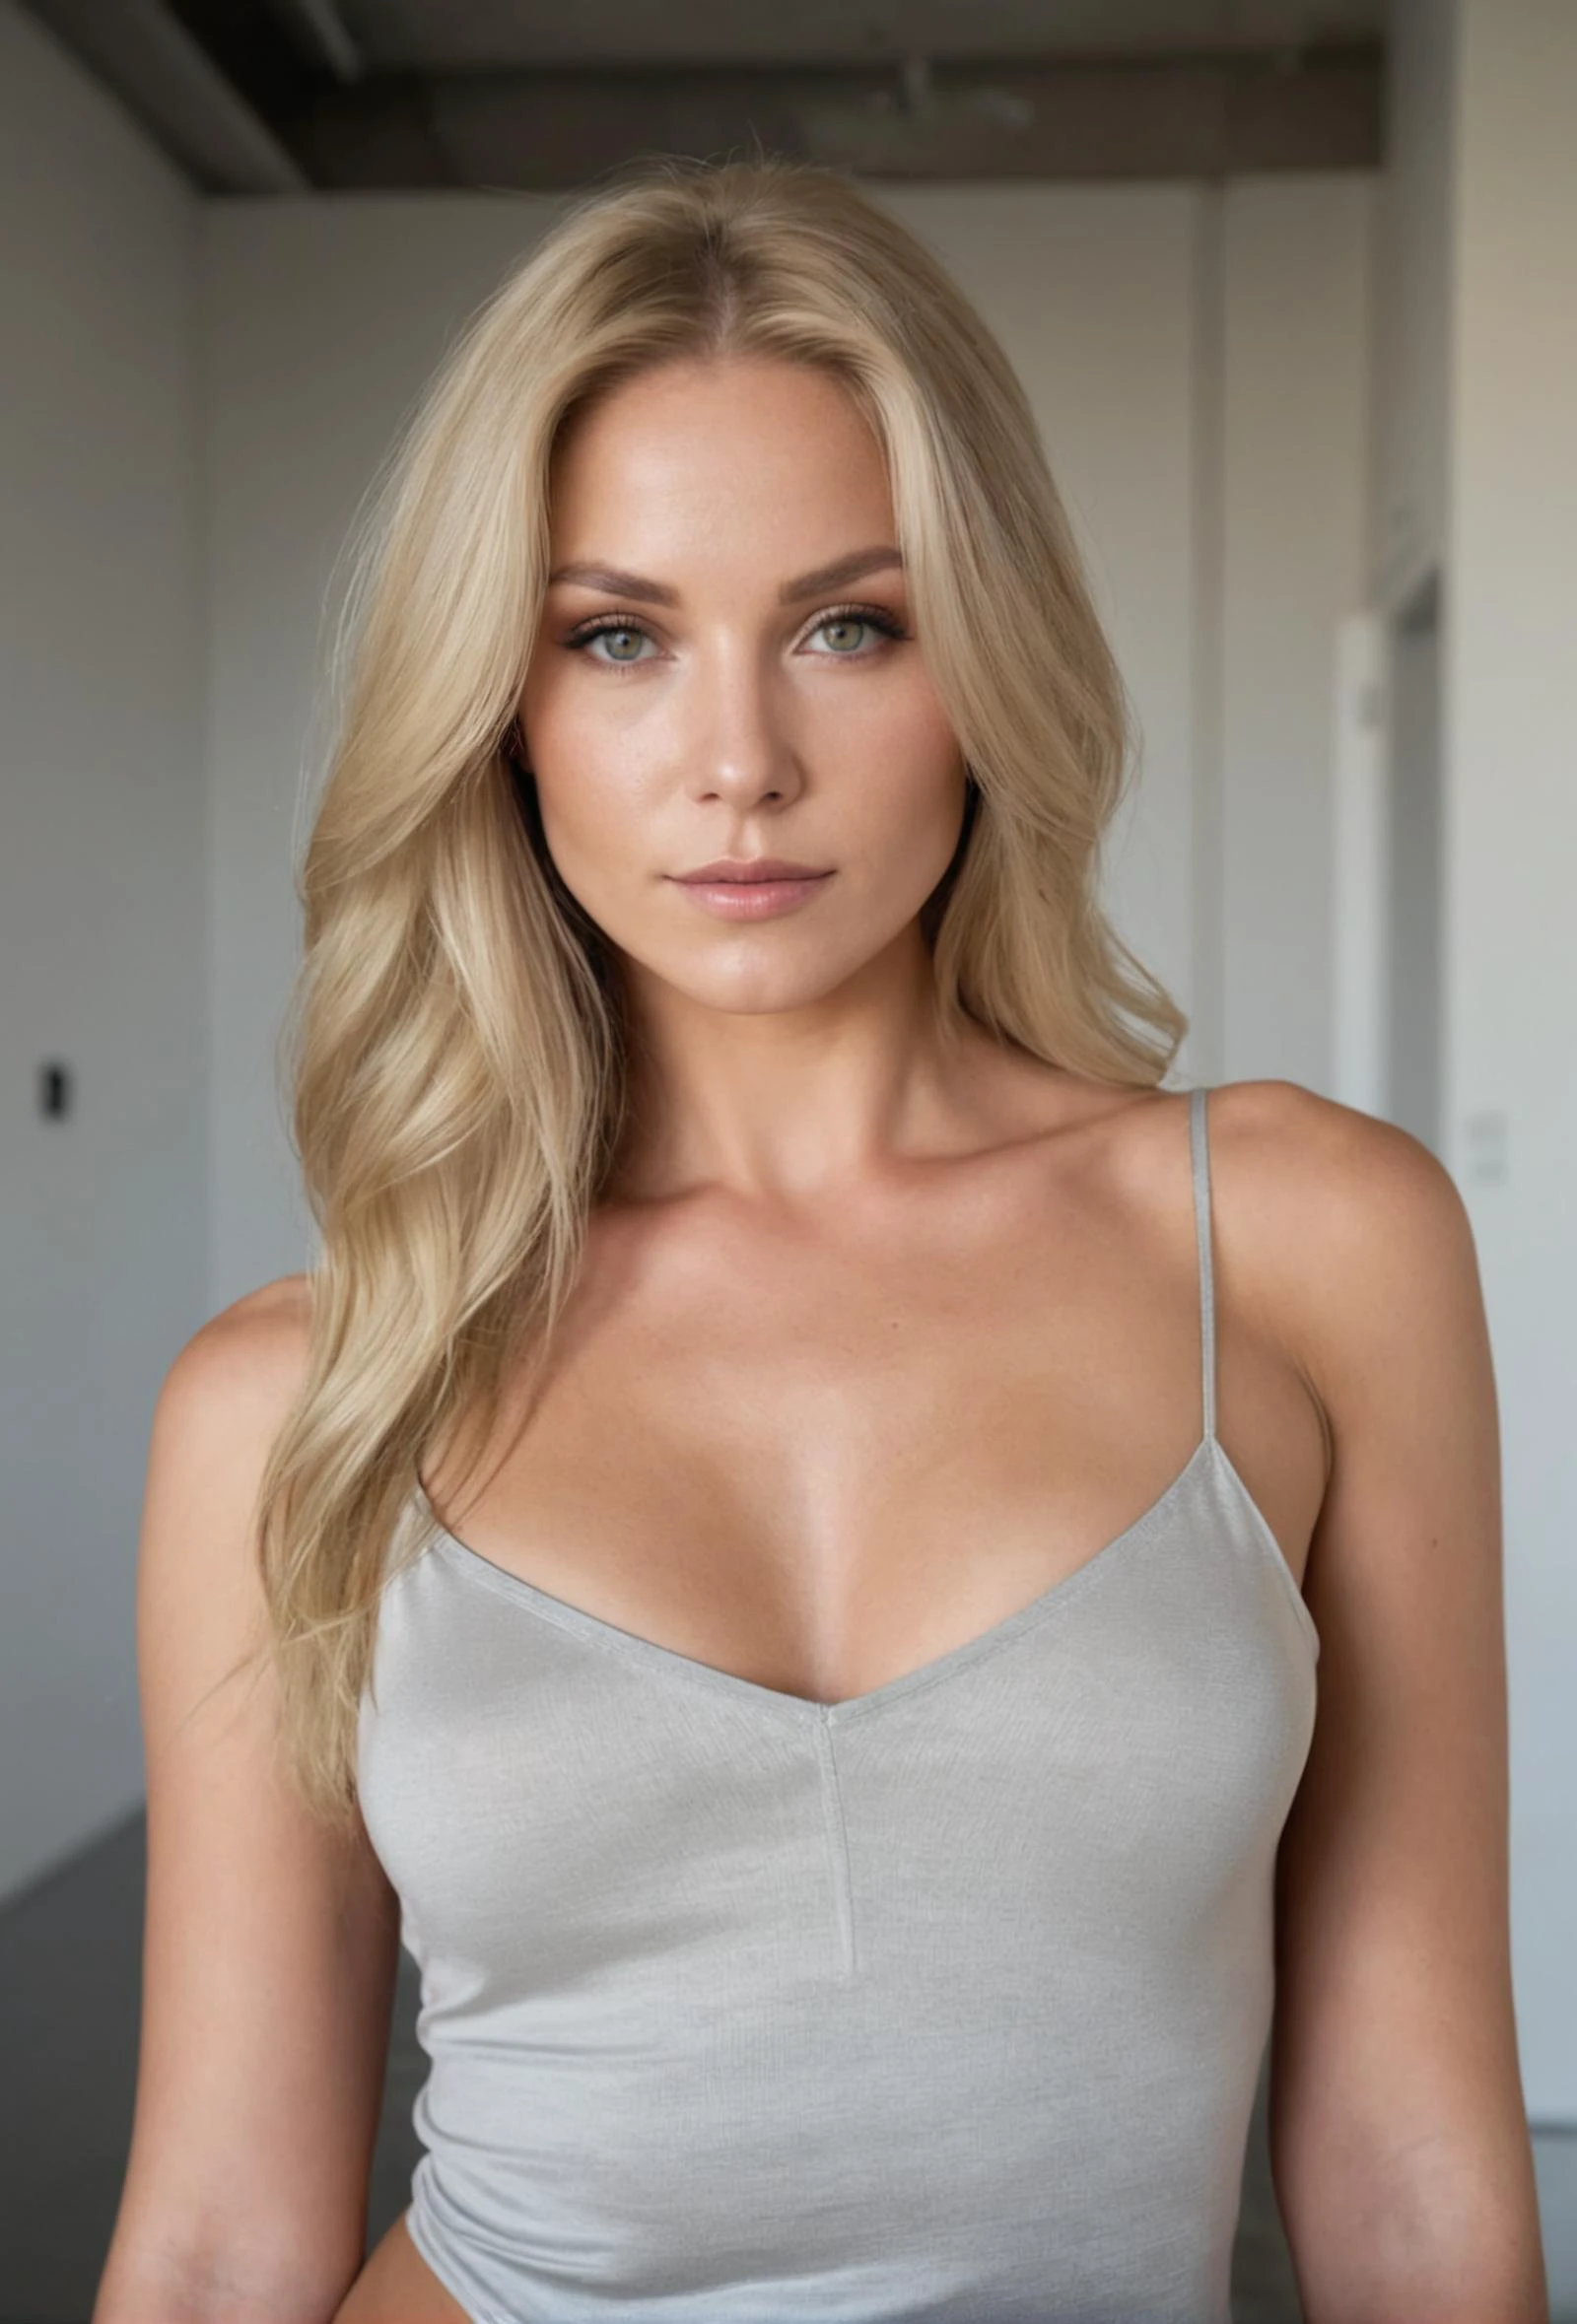 Headshot of a seductive woman, long blonde hair, wearing a light gray spaghetti strap top, facing the camera with a soft and alluring expression, in a minimalist apartment with subtle lighting, high-resolution photograph